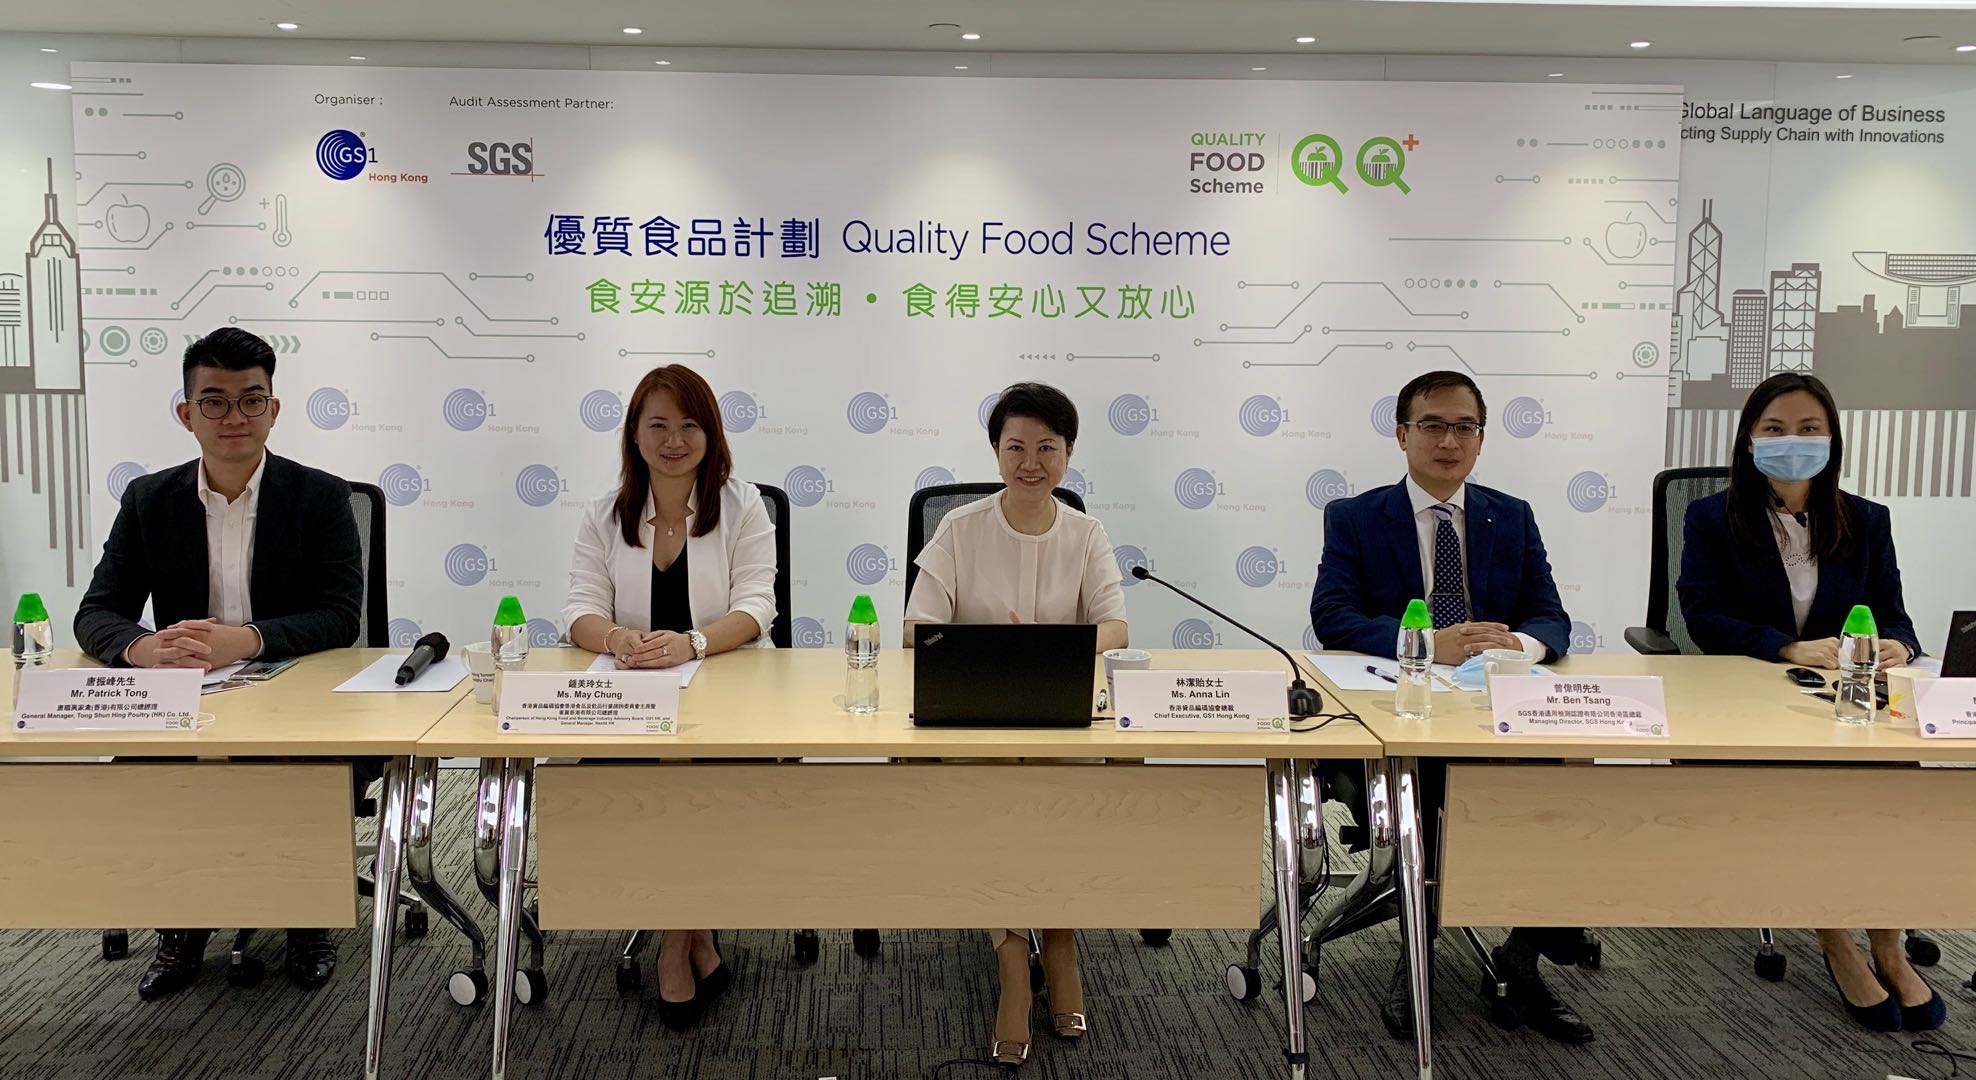 GS1 Hong Kong Launches Quality Food Scheme+